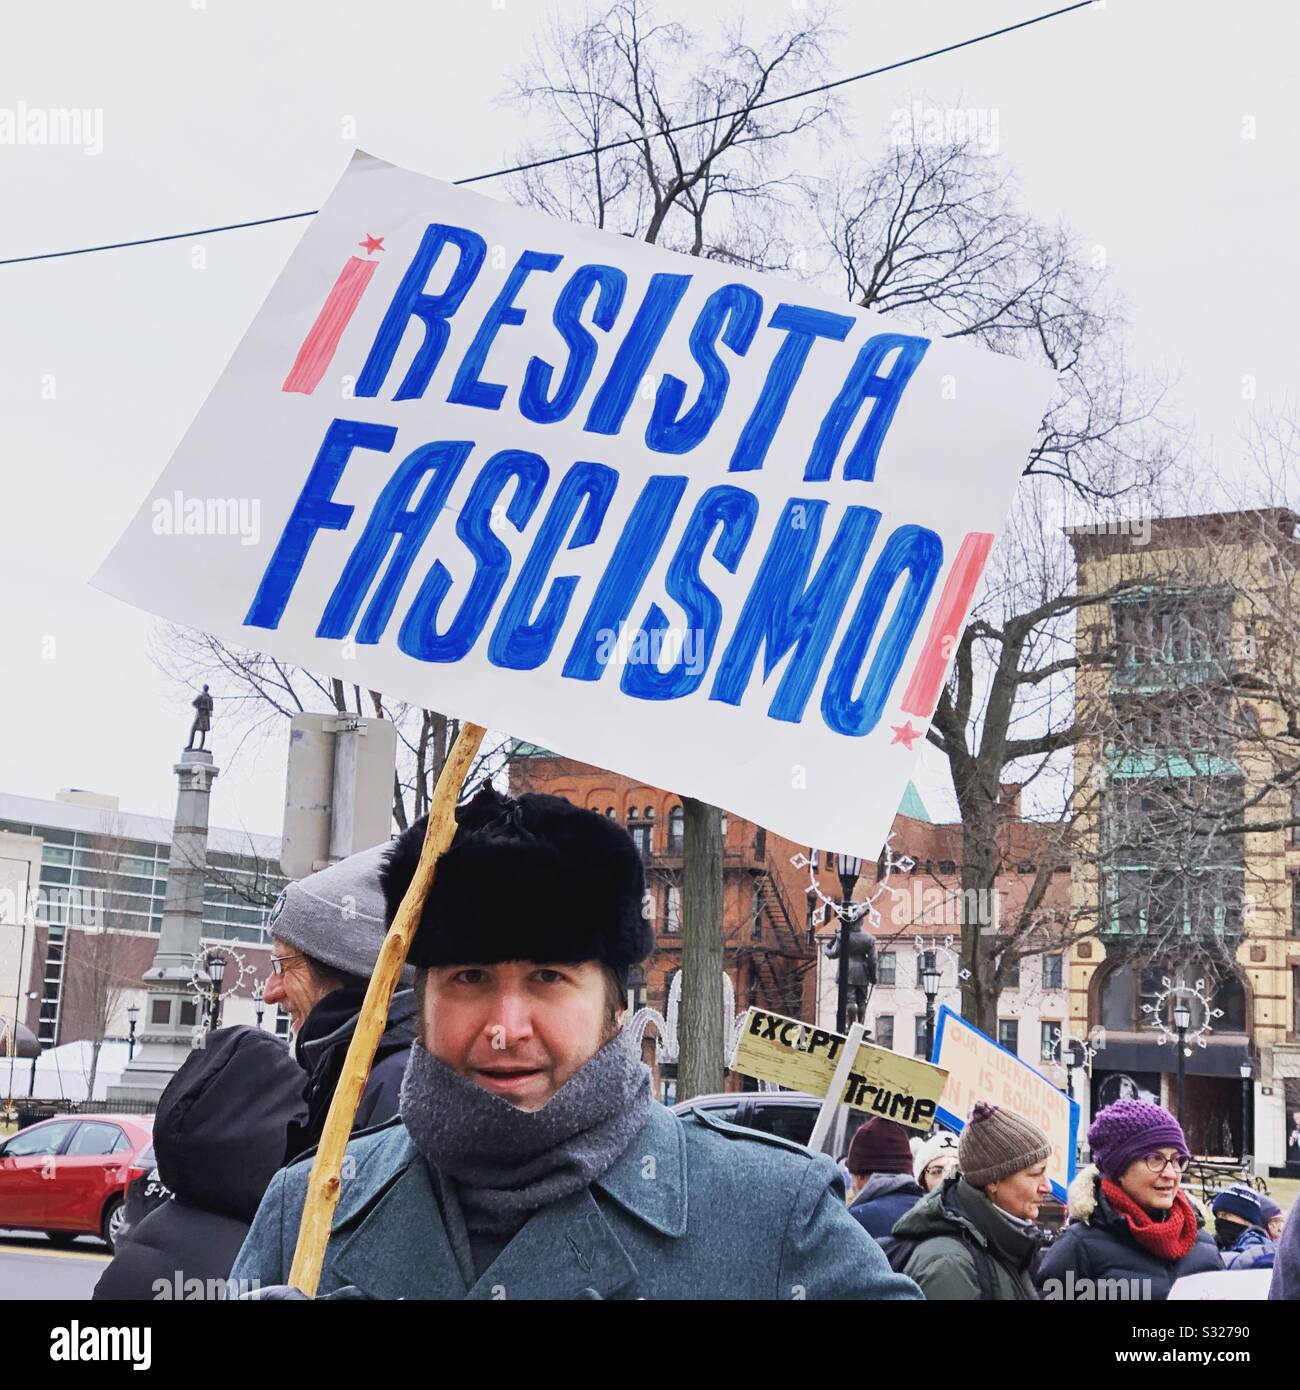 18th January. 2020 Pioneer Valley Women’s March, Springfield, Massachusetts, United States. A man holds a sign that reads “Resista Fascismo!” (“Resist Fascism!”) Stock Photo